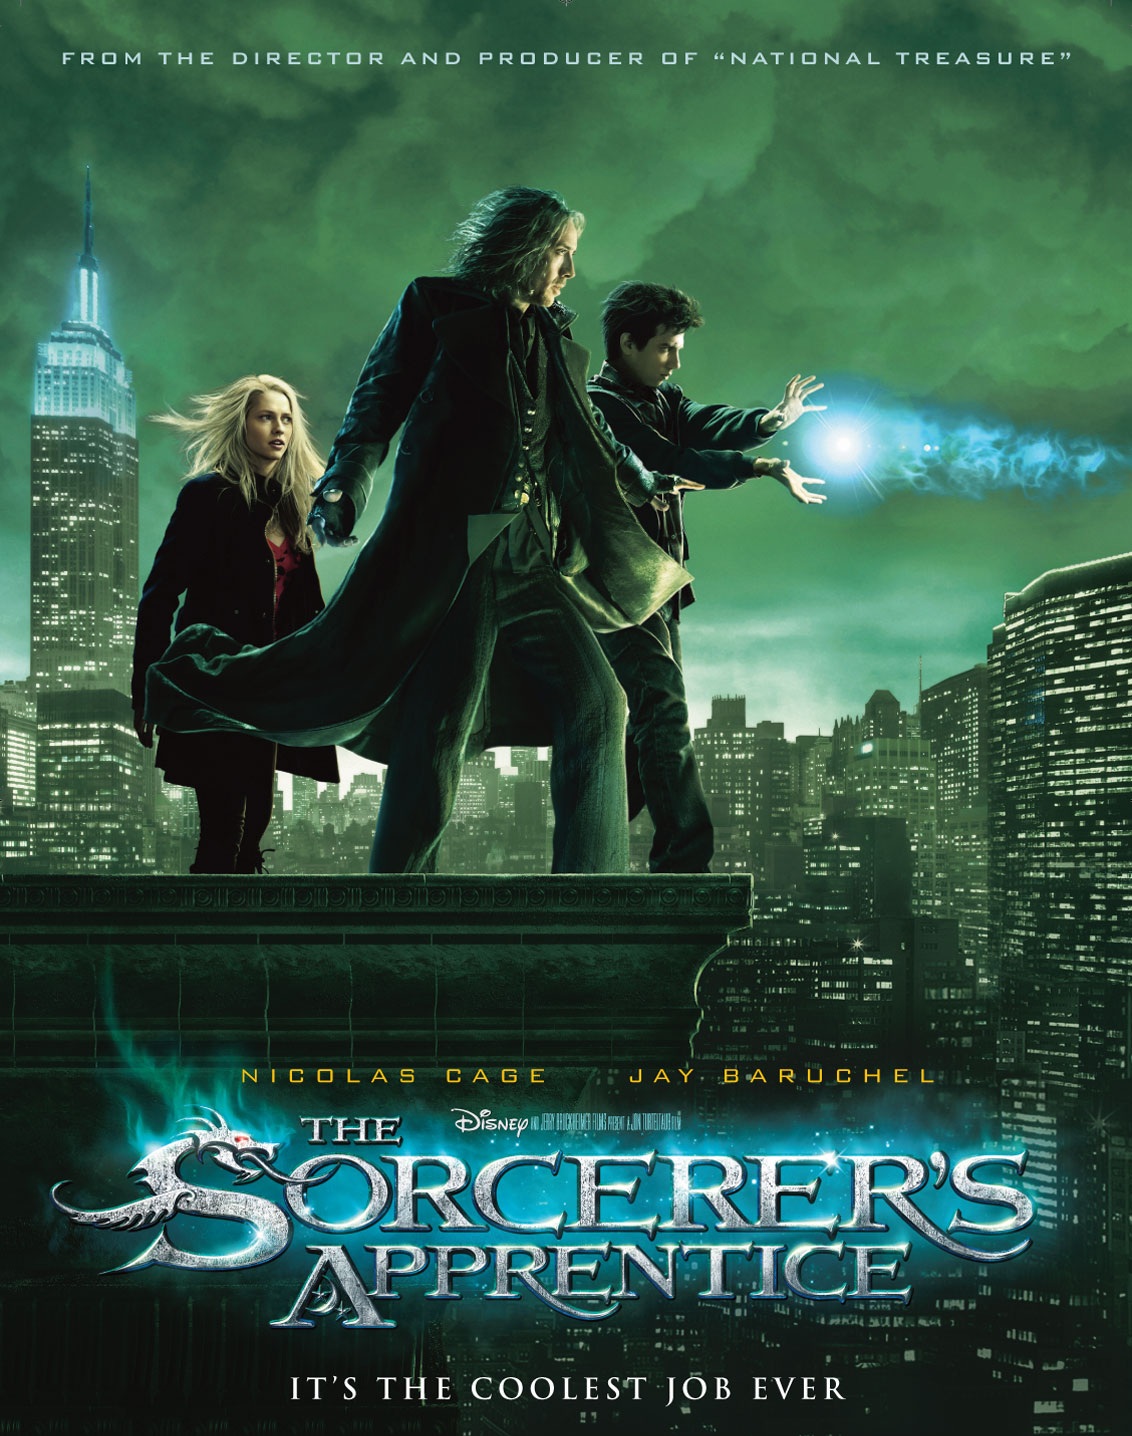 The Sorceres Apprentice (2010) - watch full hd streaming movie online free